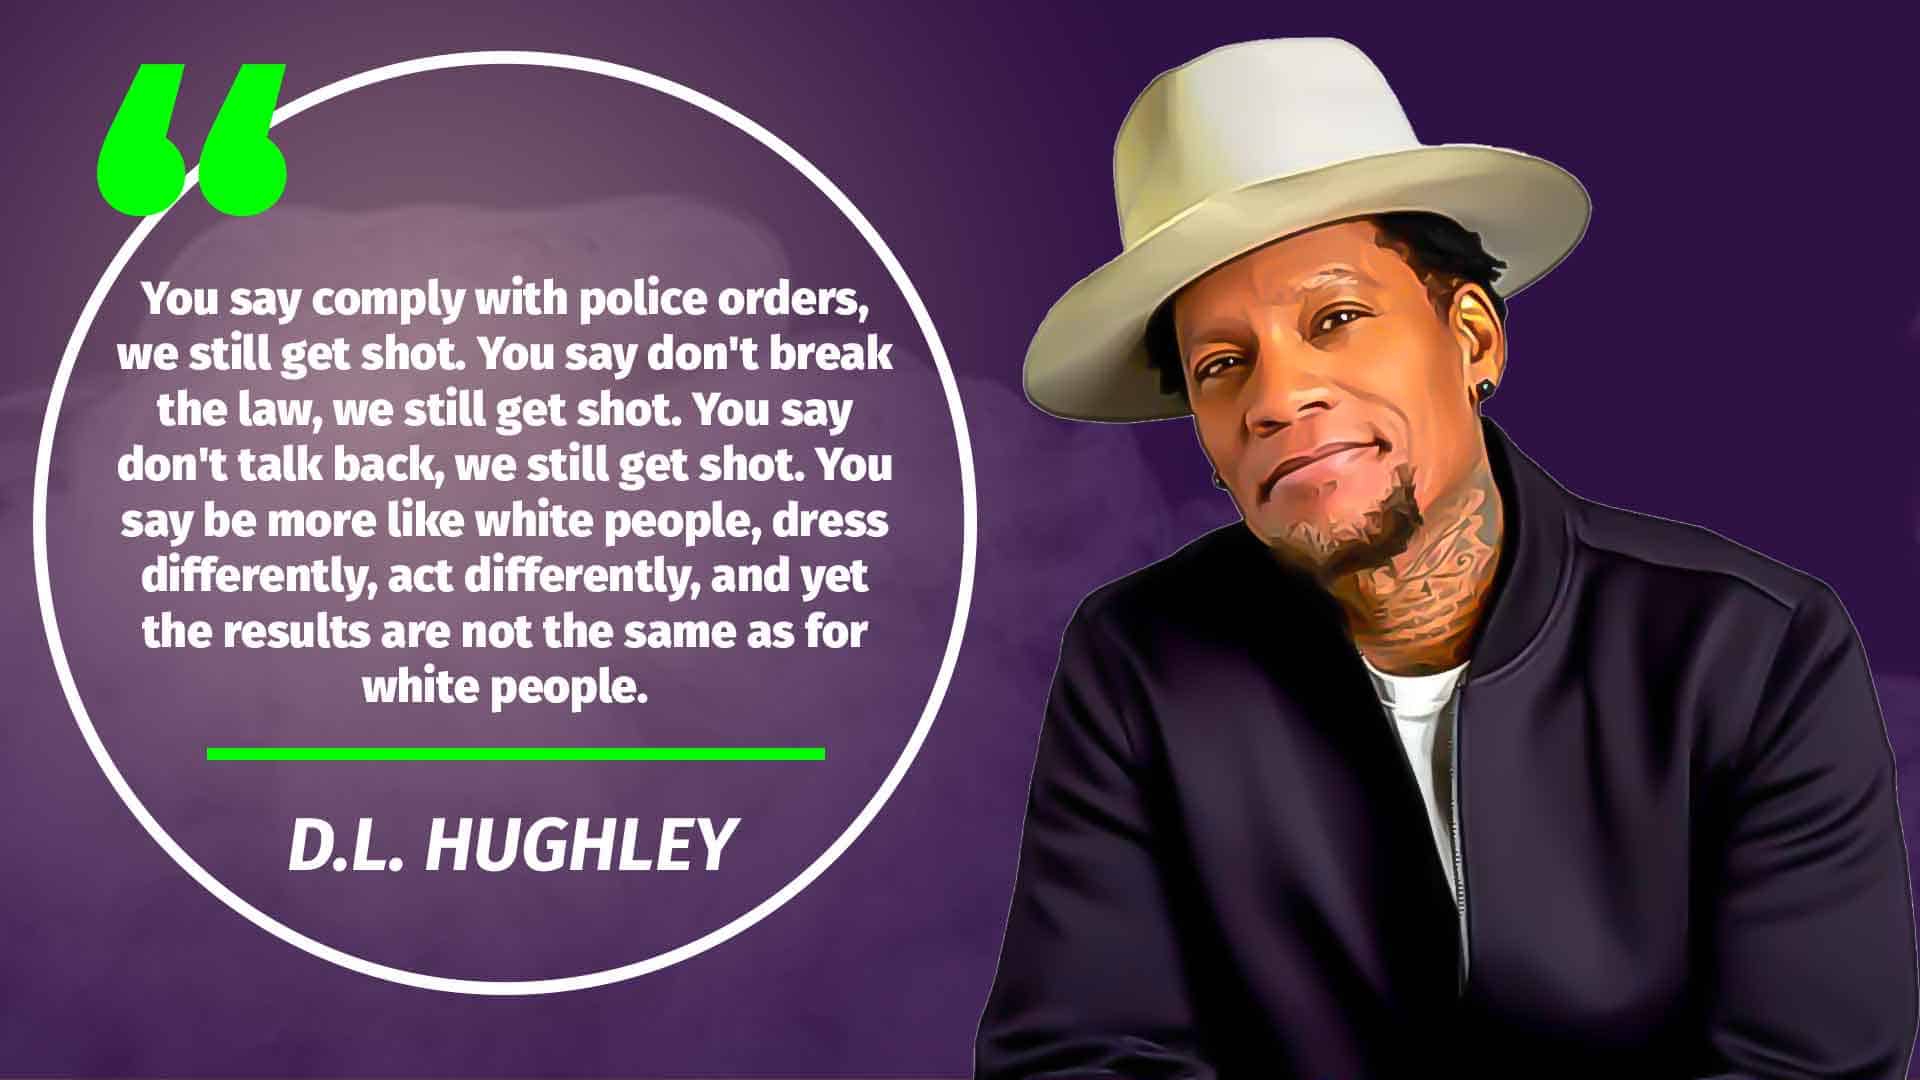 DL Hughley QUOTE 4